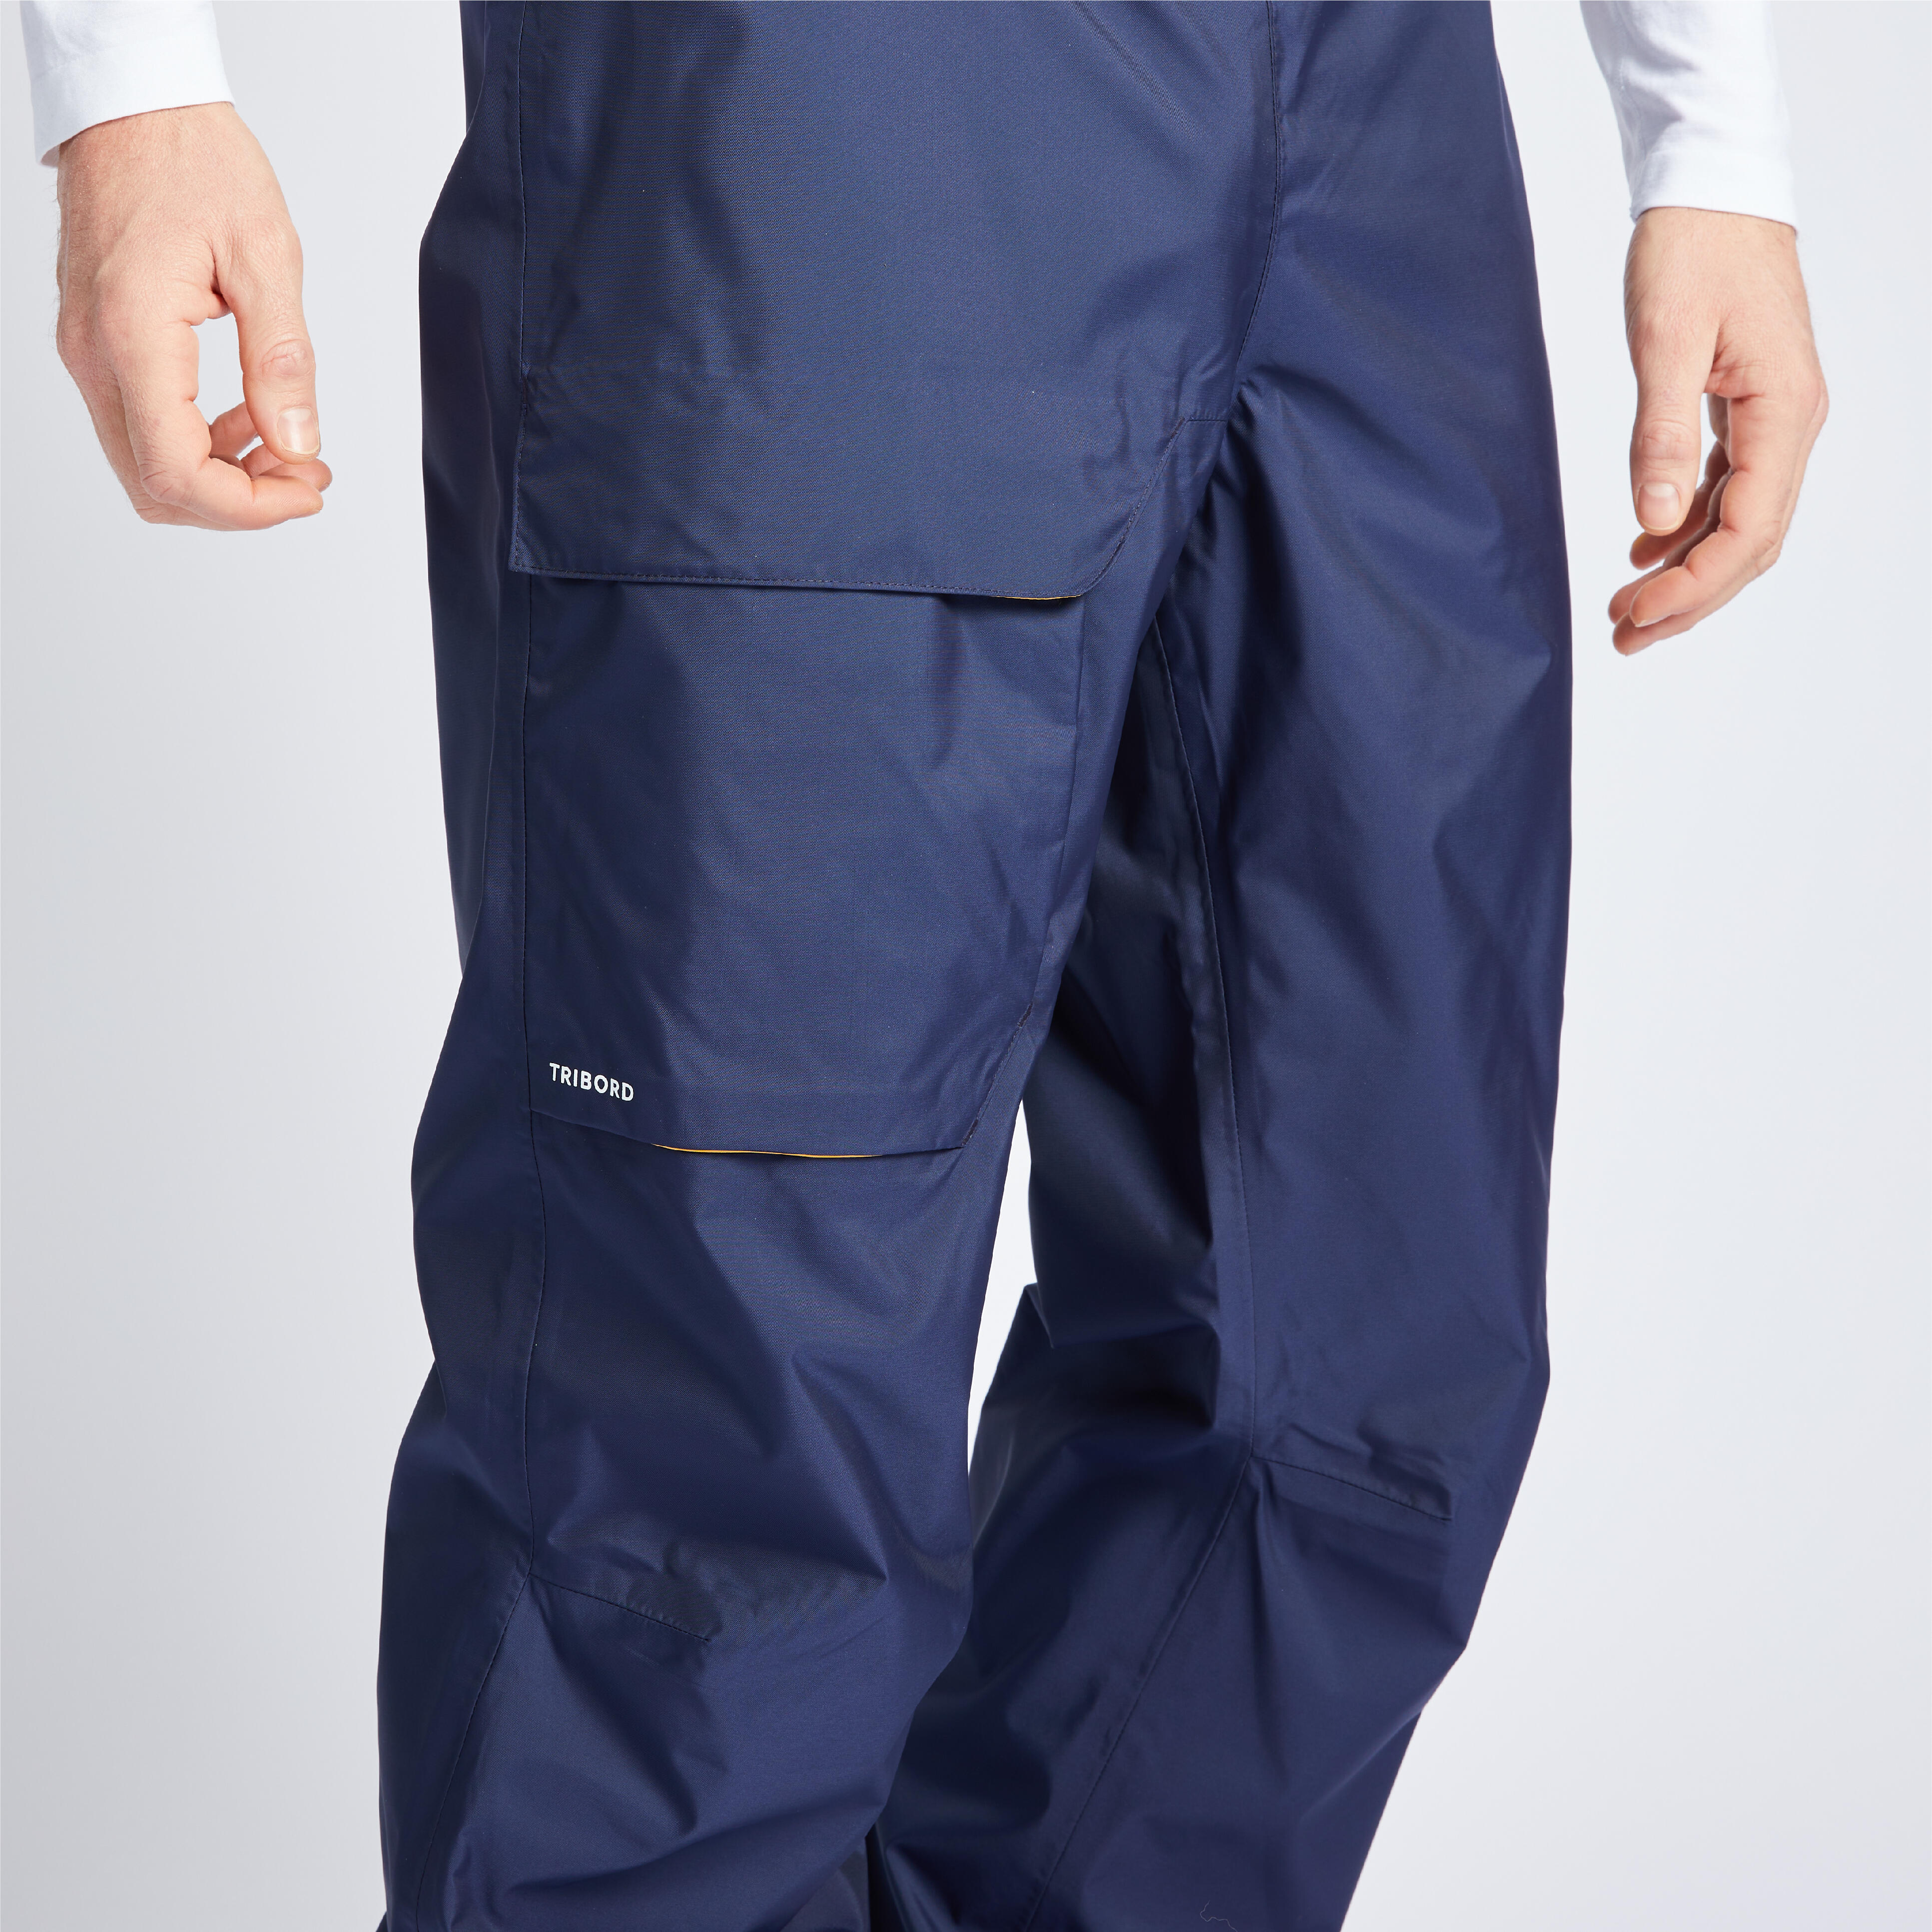 Tribord Mens waterproof sailing pants for sale in Co Dublin for 45 on  DoneDeal